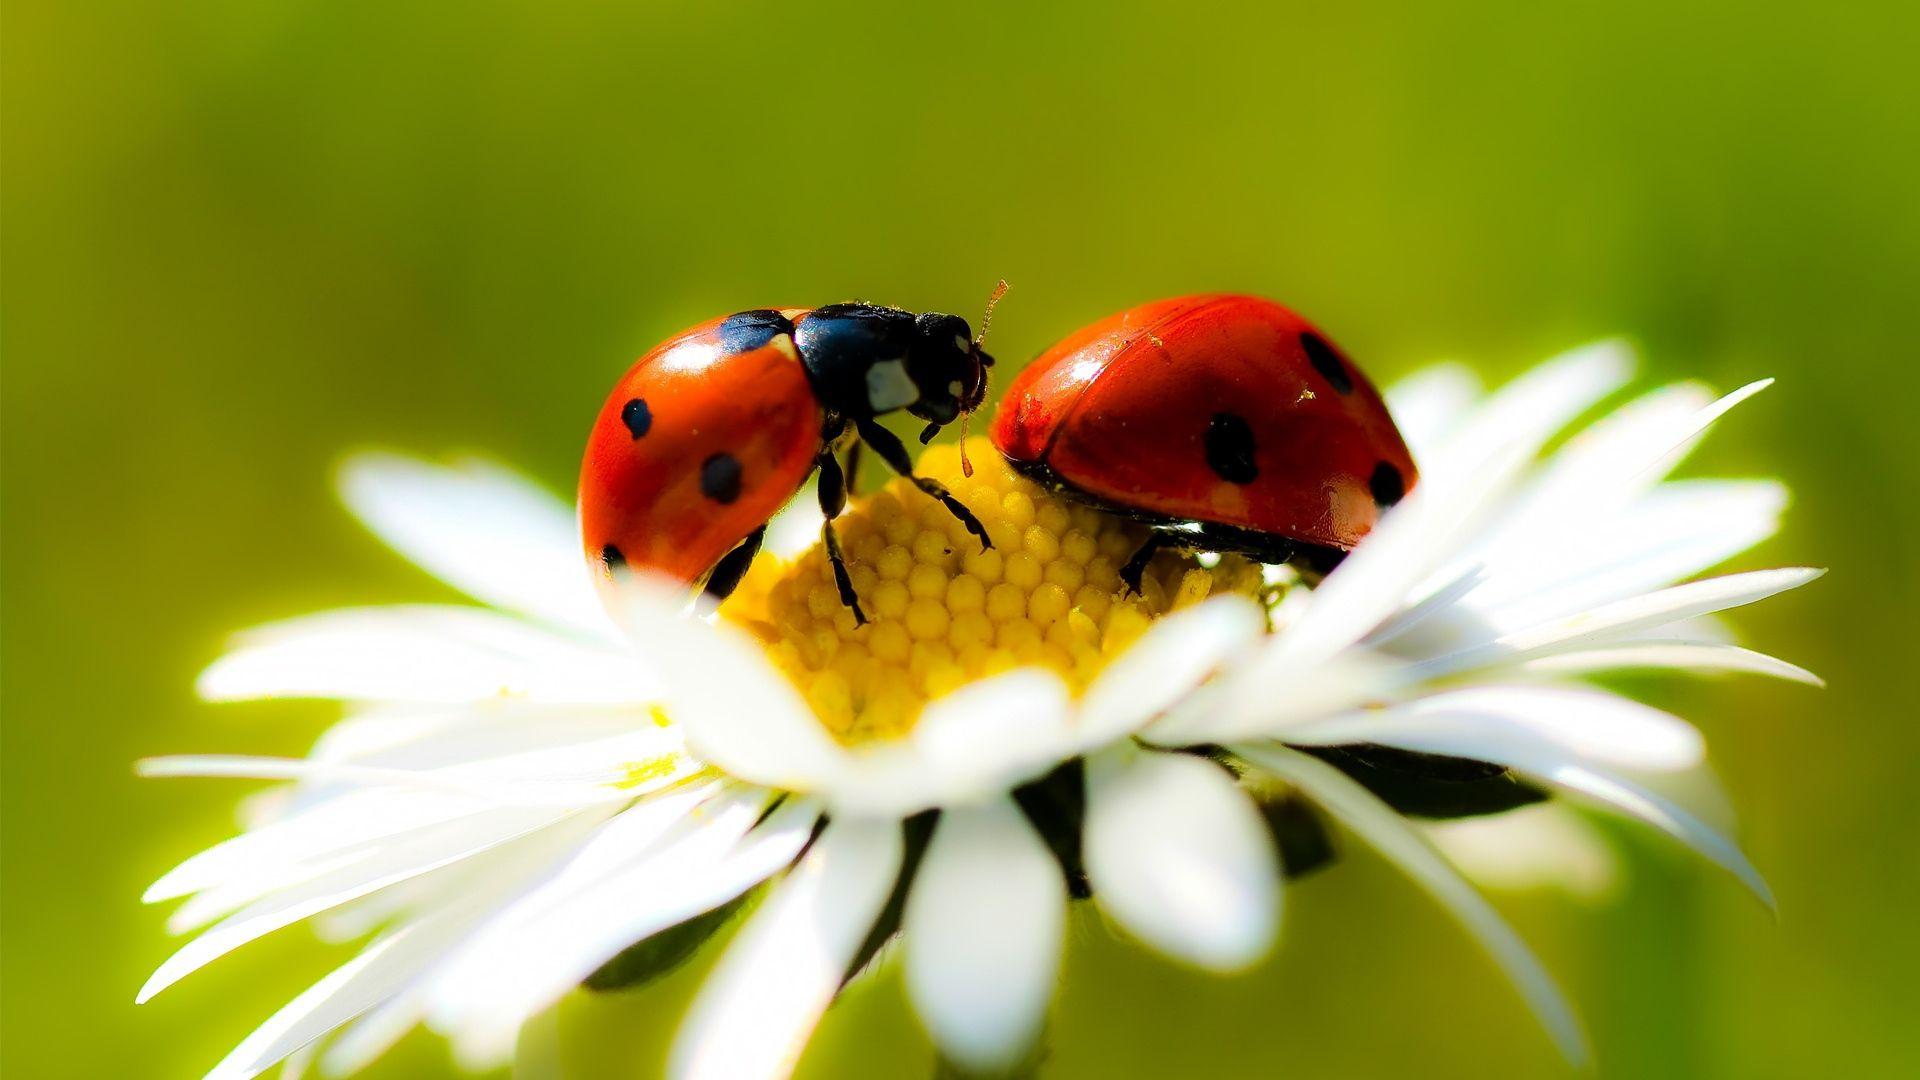 Download Wallpaper 1920x1080 chamomile, ladybug, crawling, insect